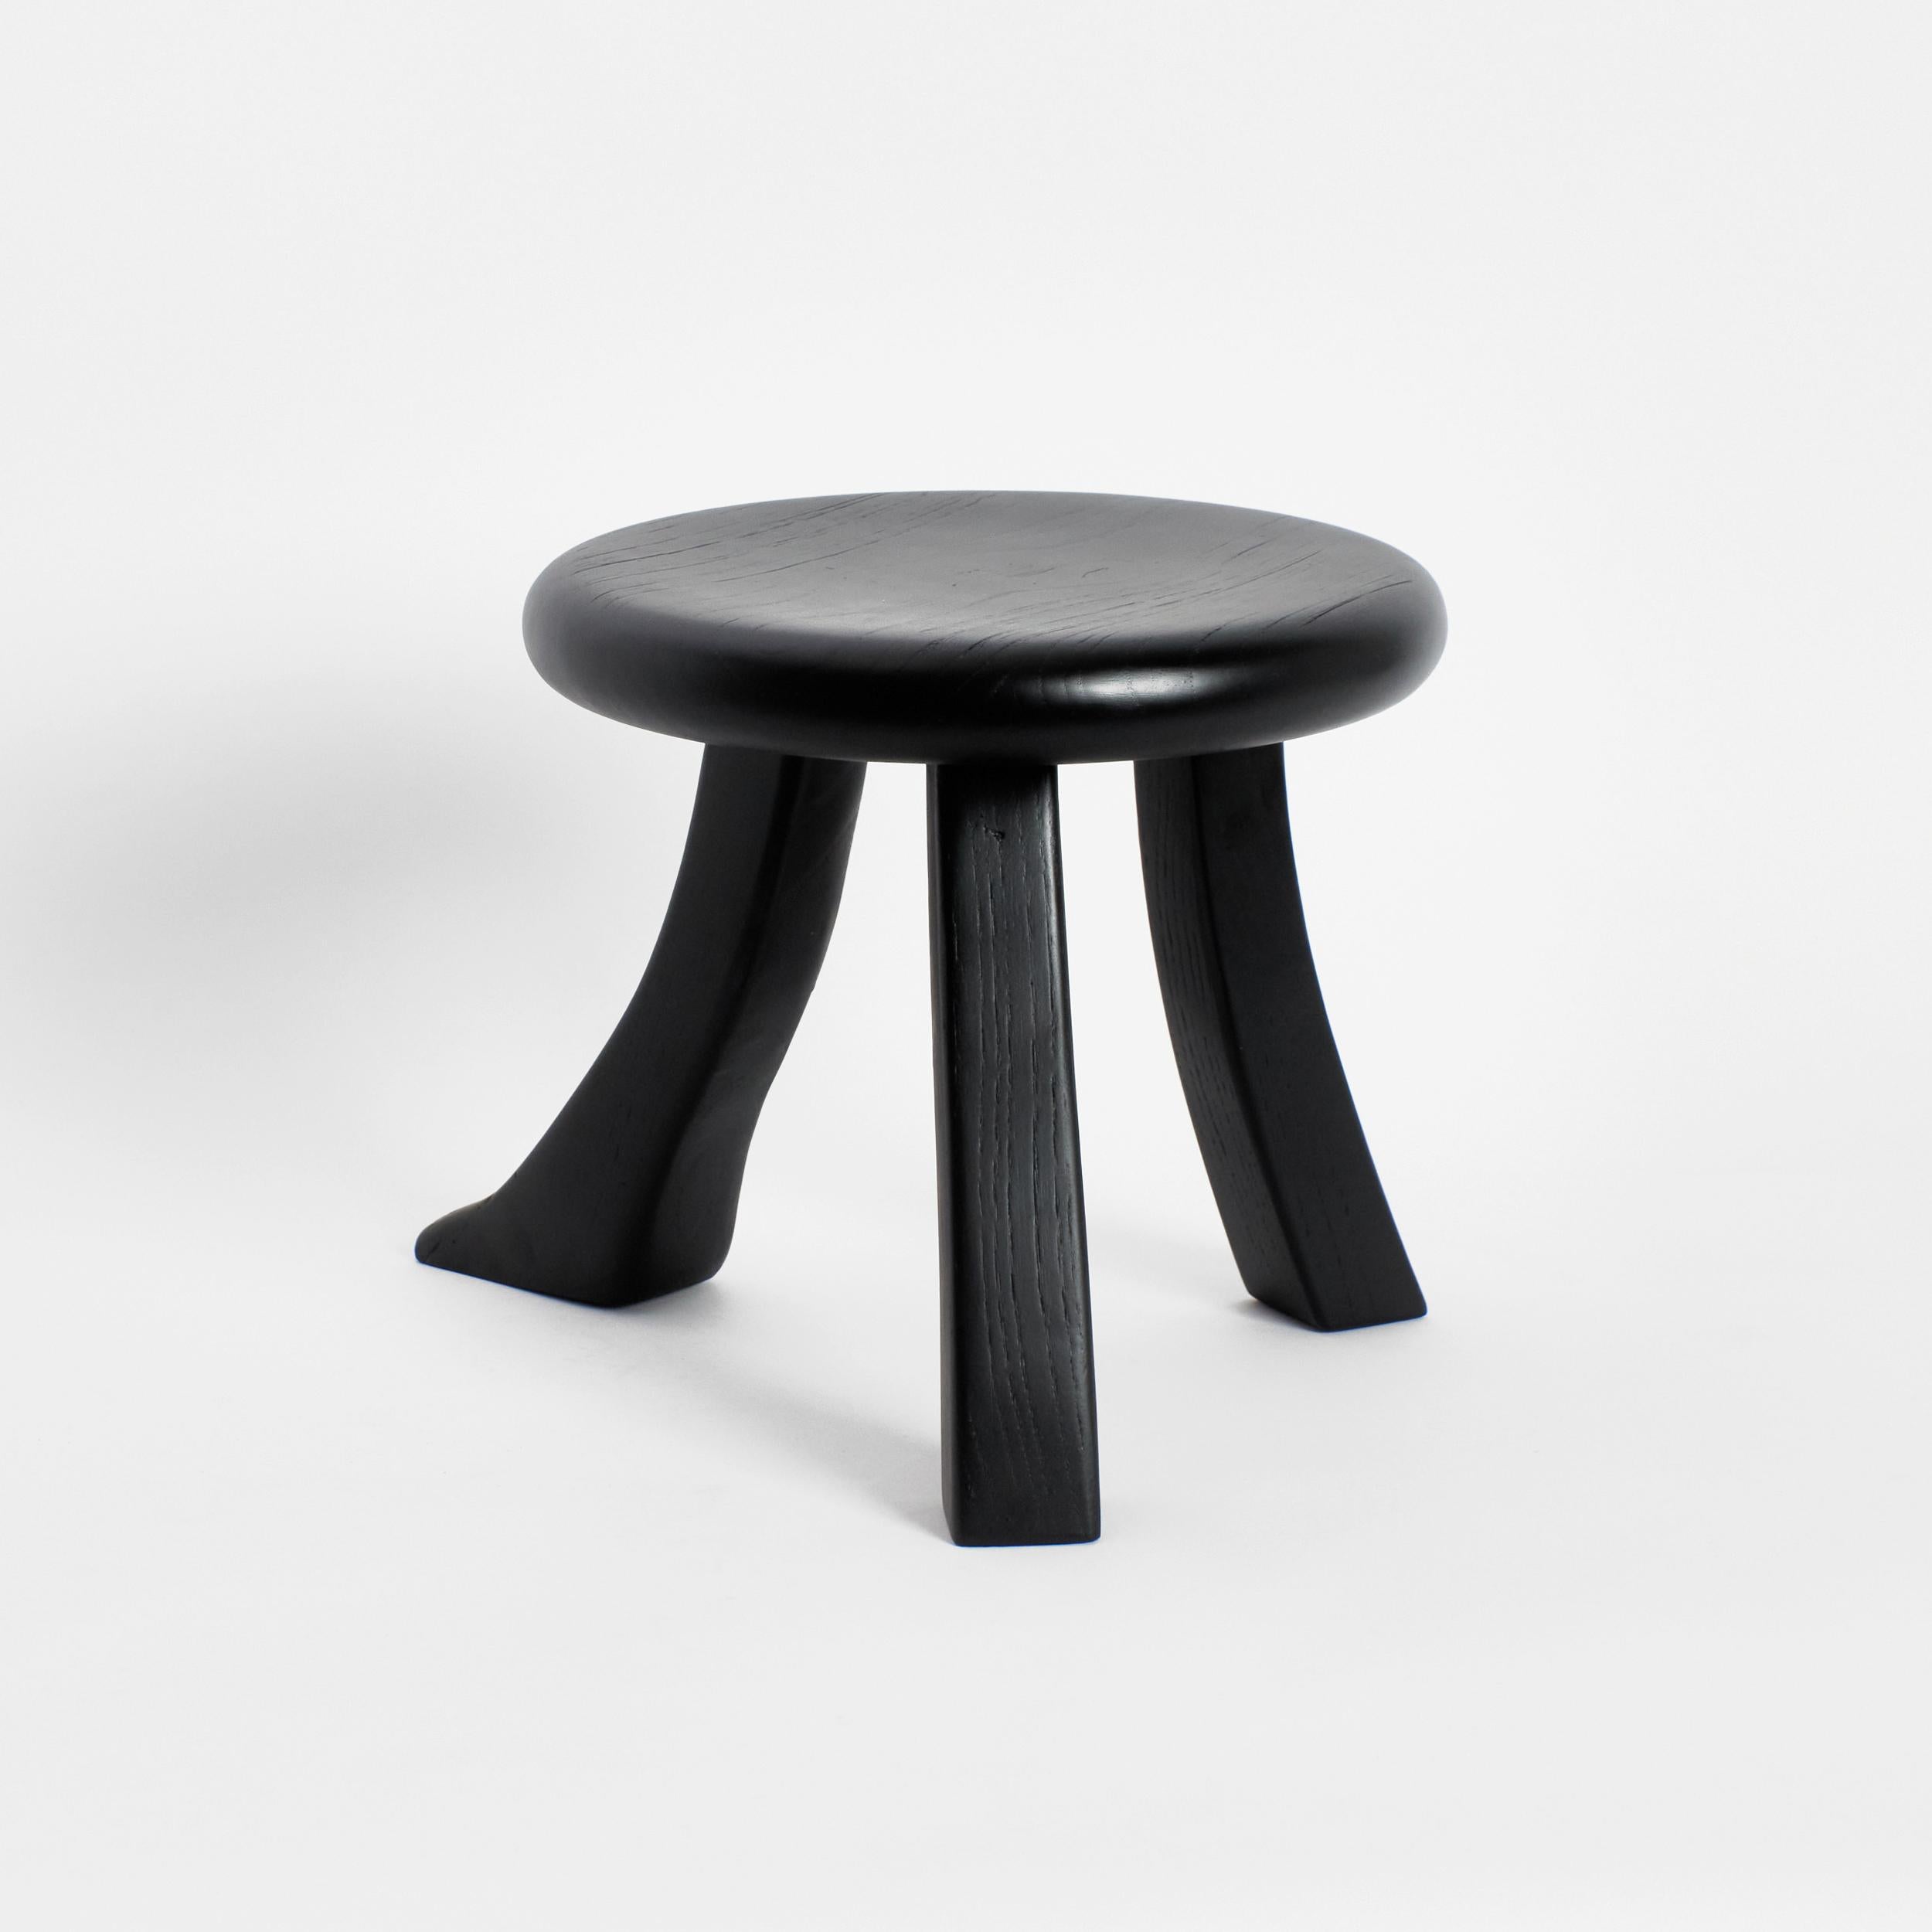 Portuguese Foot Stool in Black For Sale